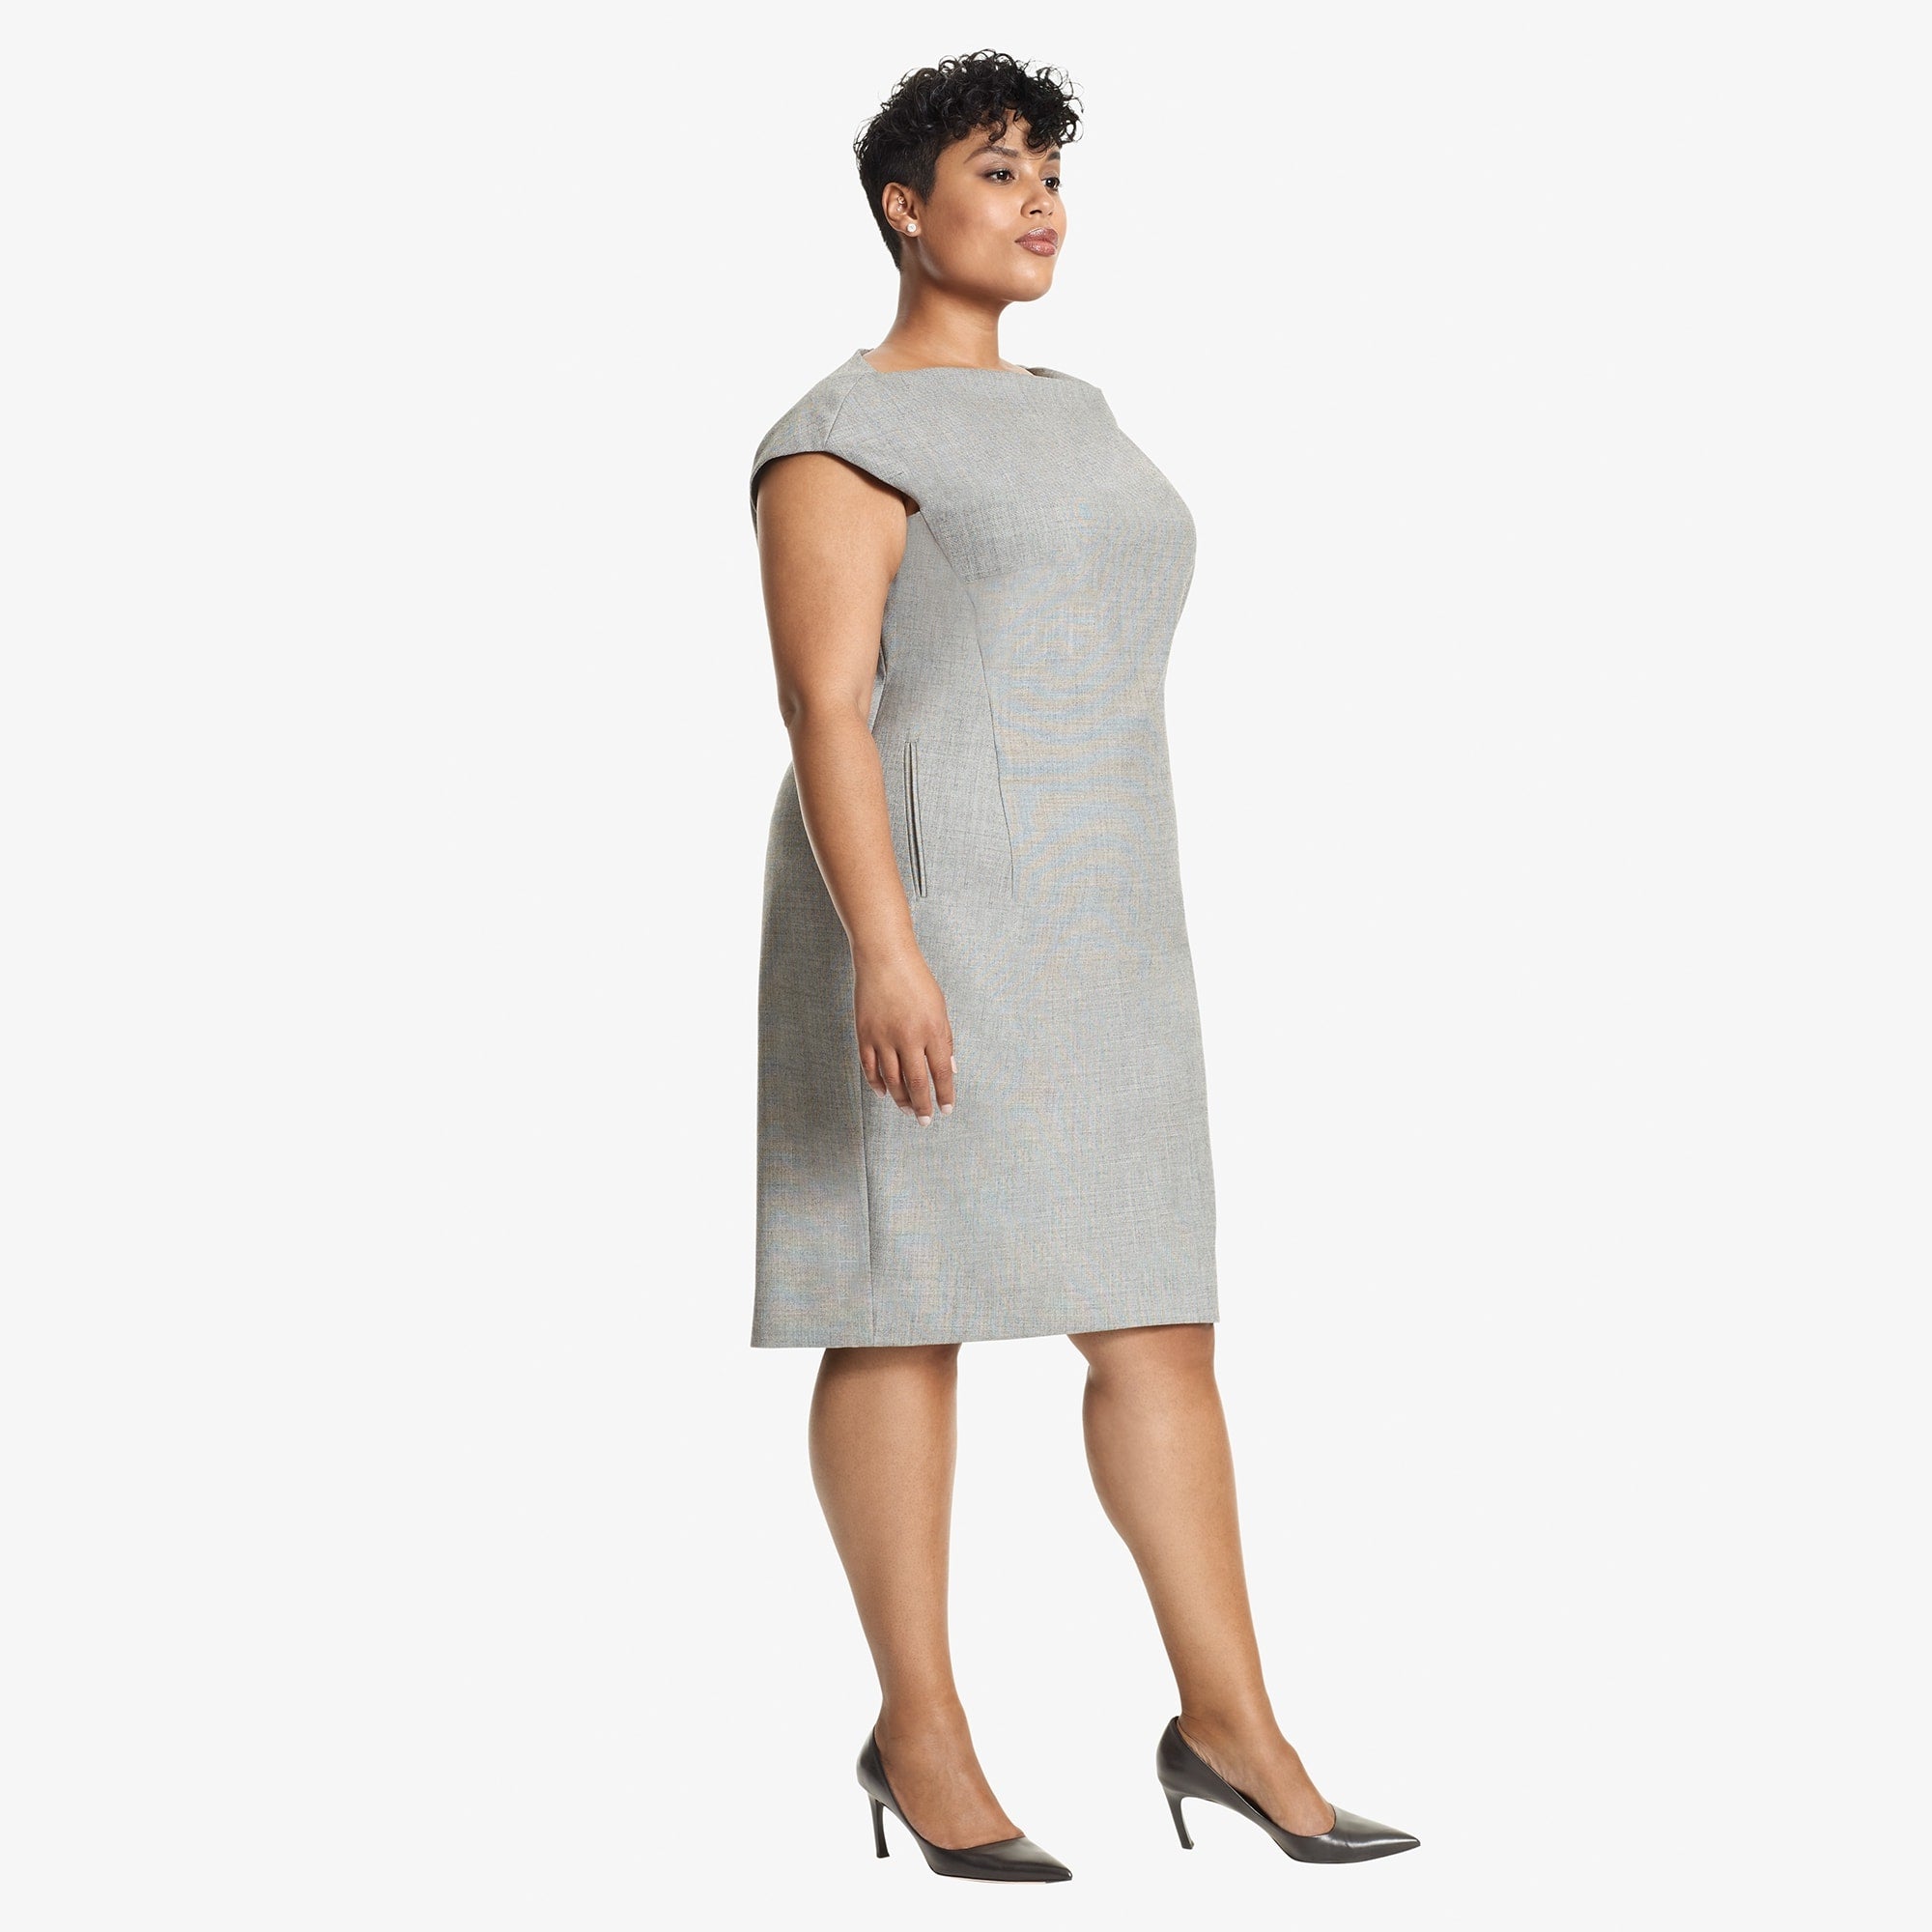 Side image of a woman standing wearing the Marilyn Dress Sharkskin in Black and White